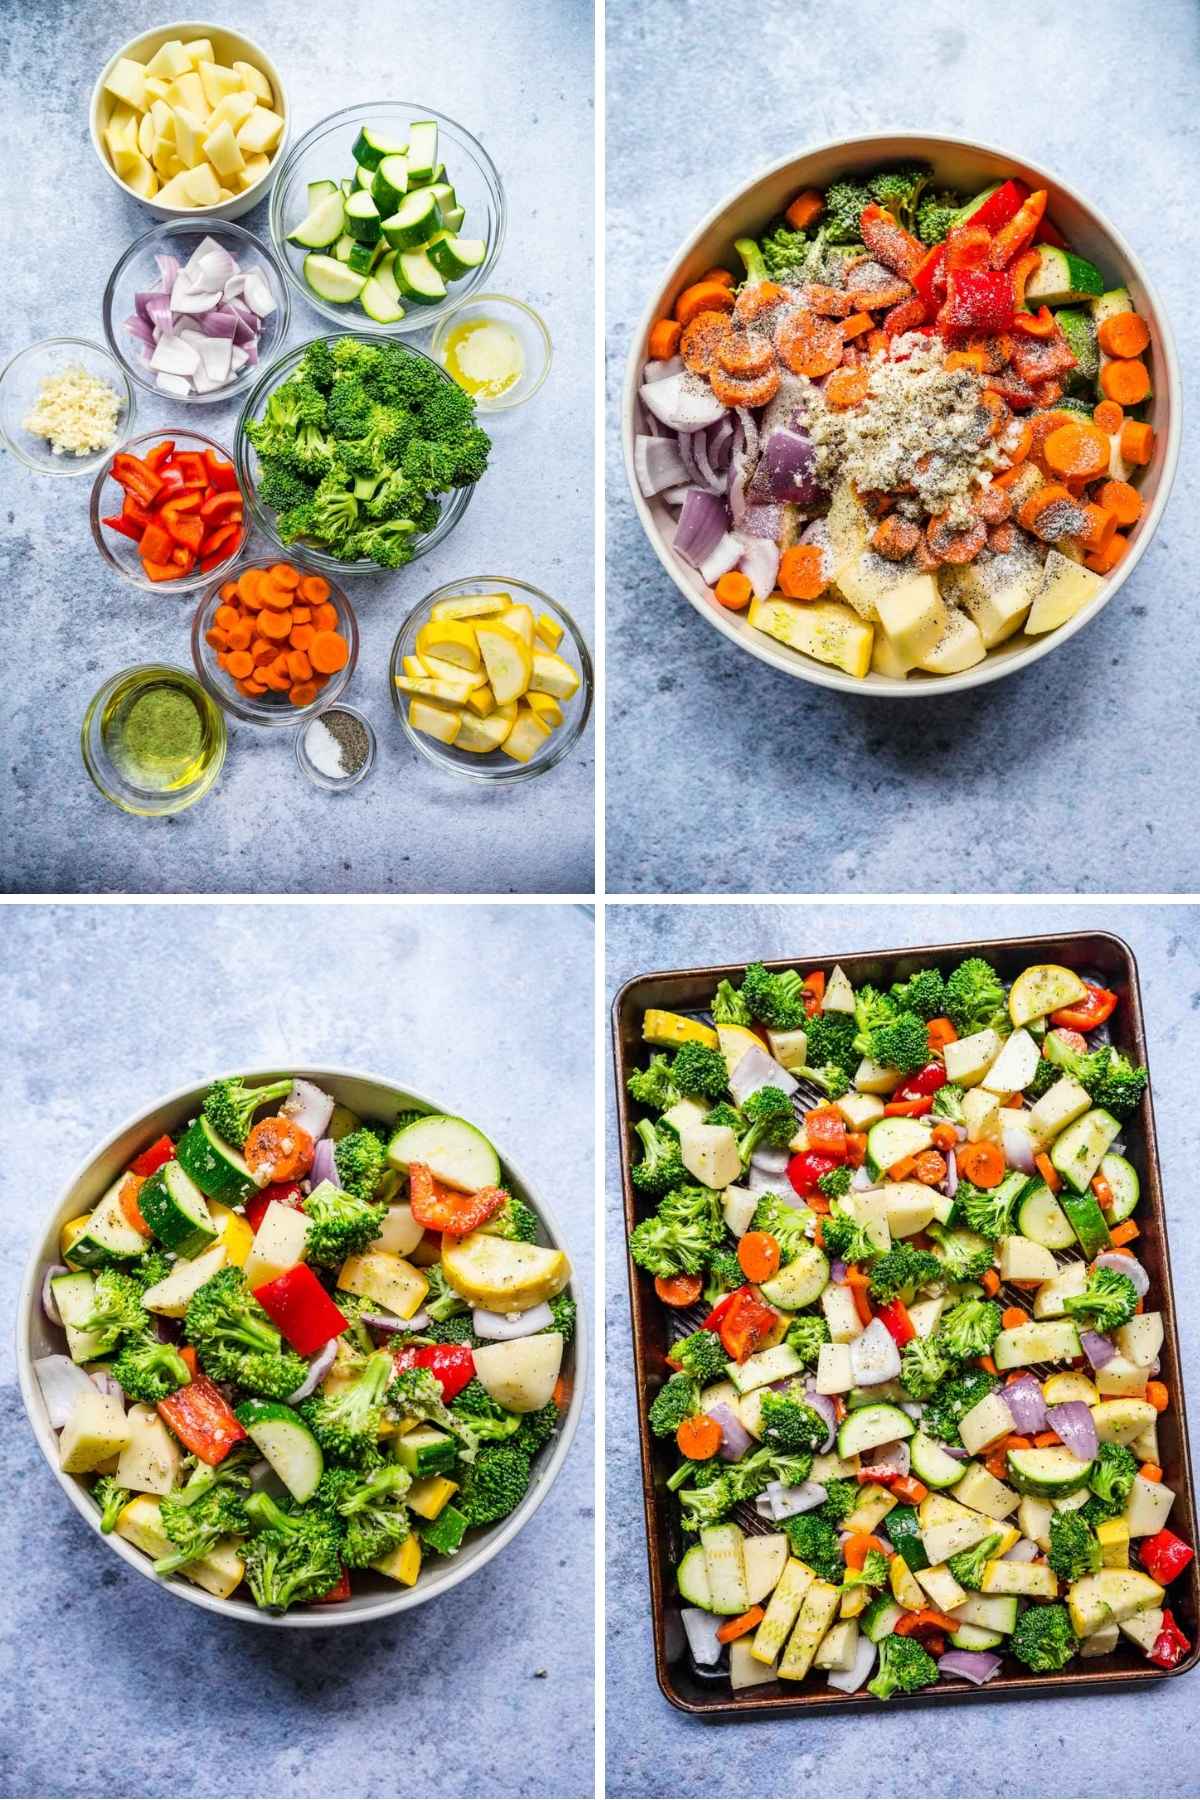 Easy Roasted Vegetables collage